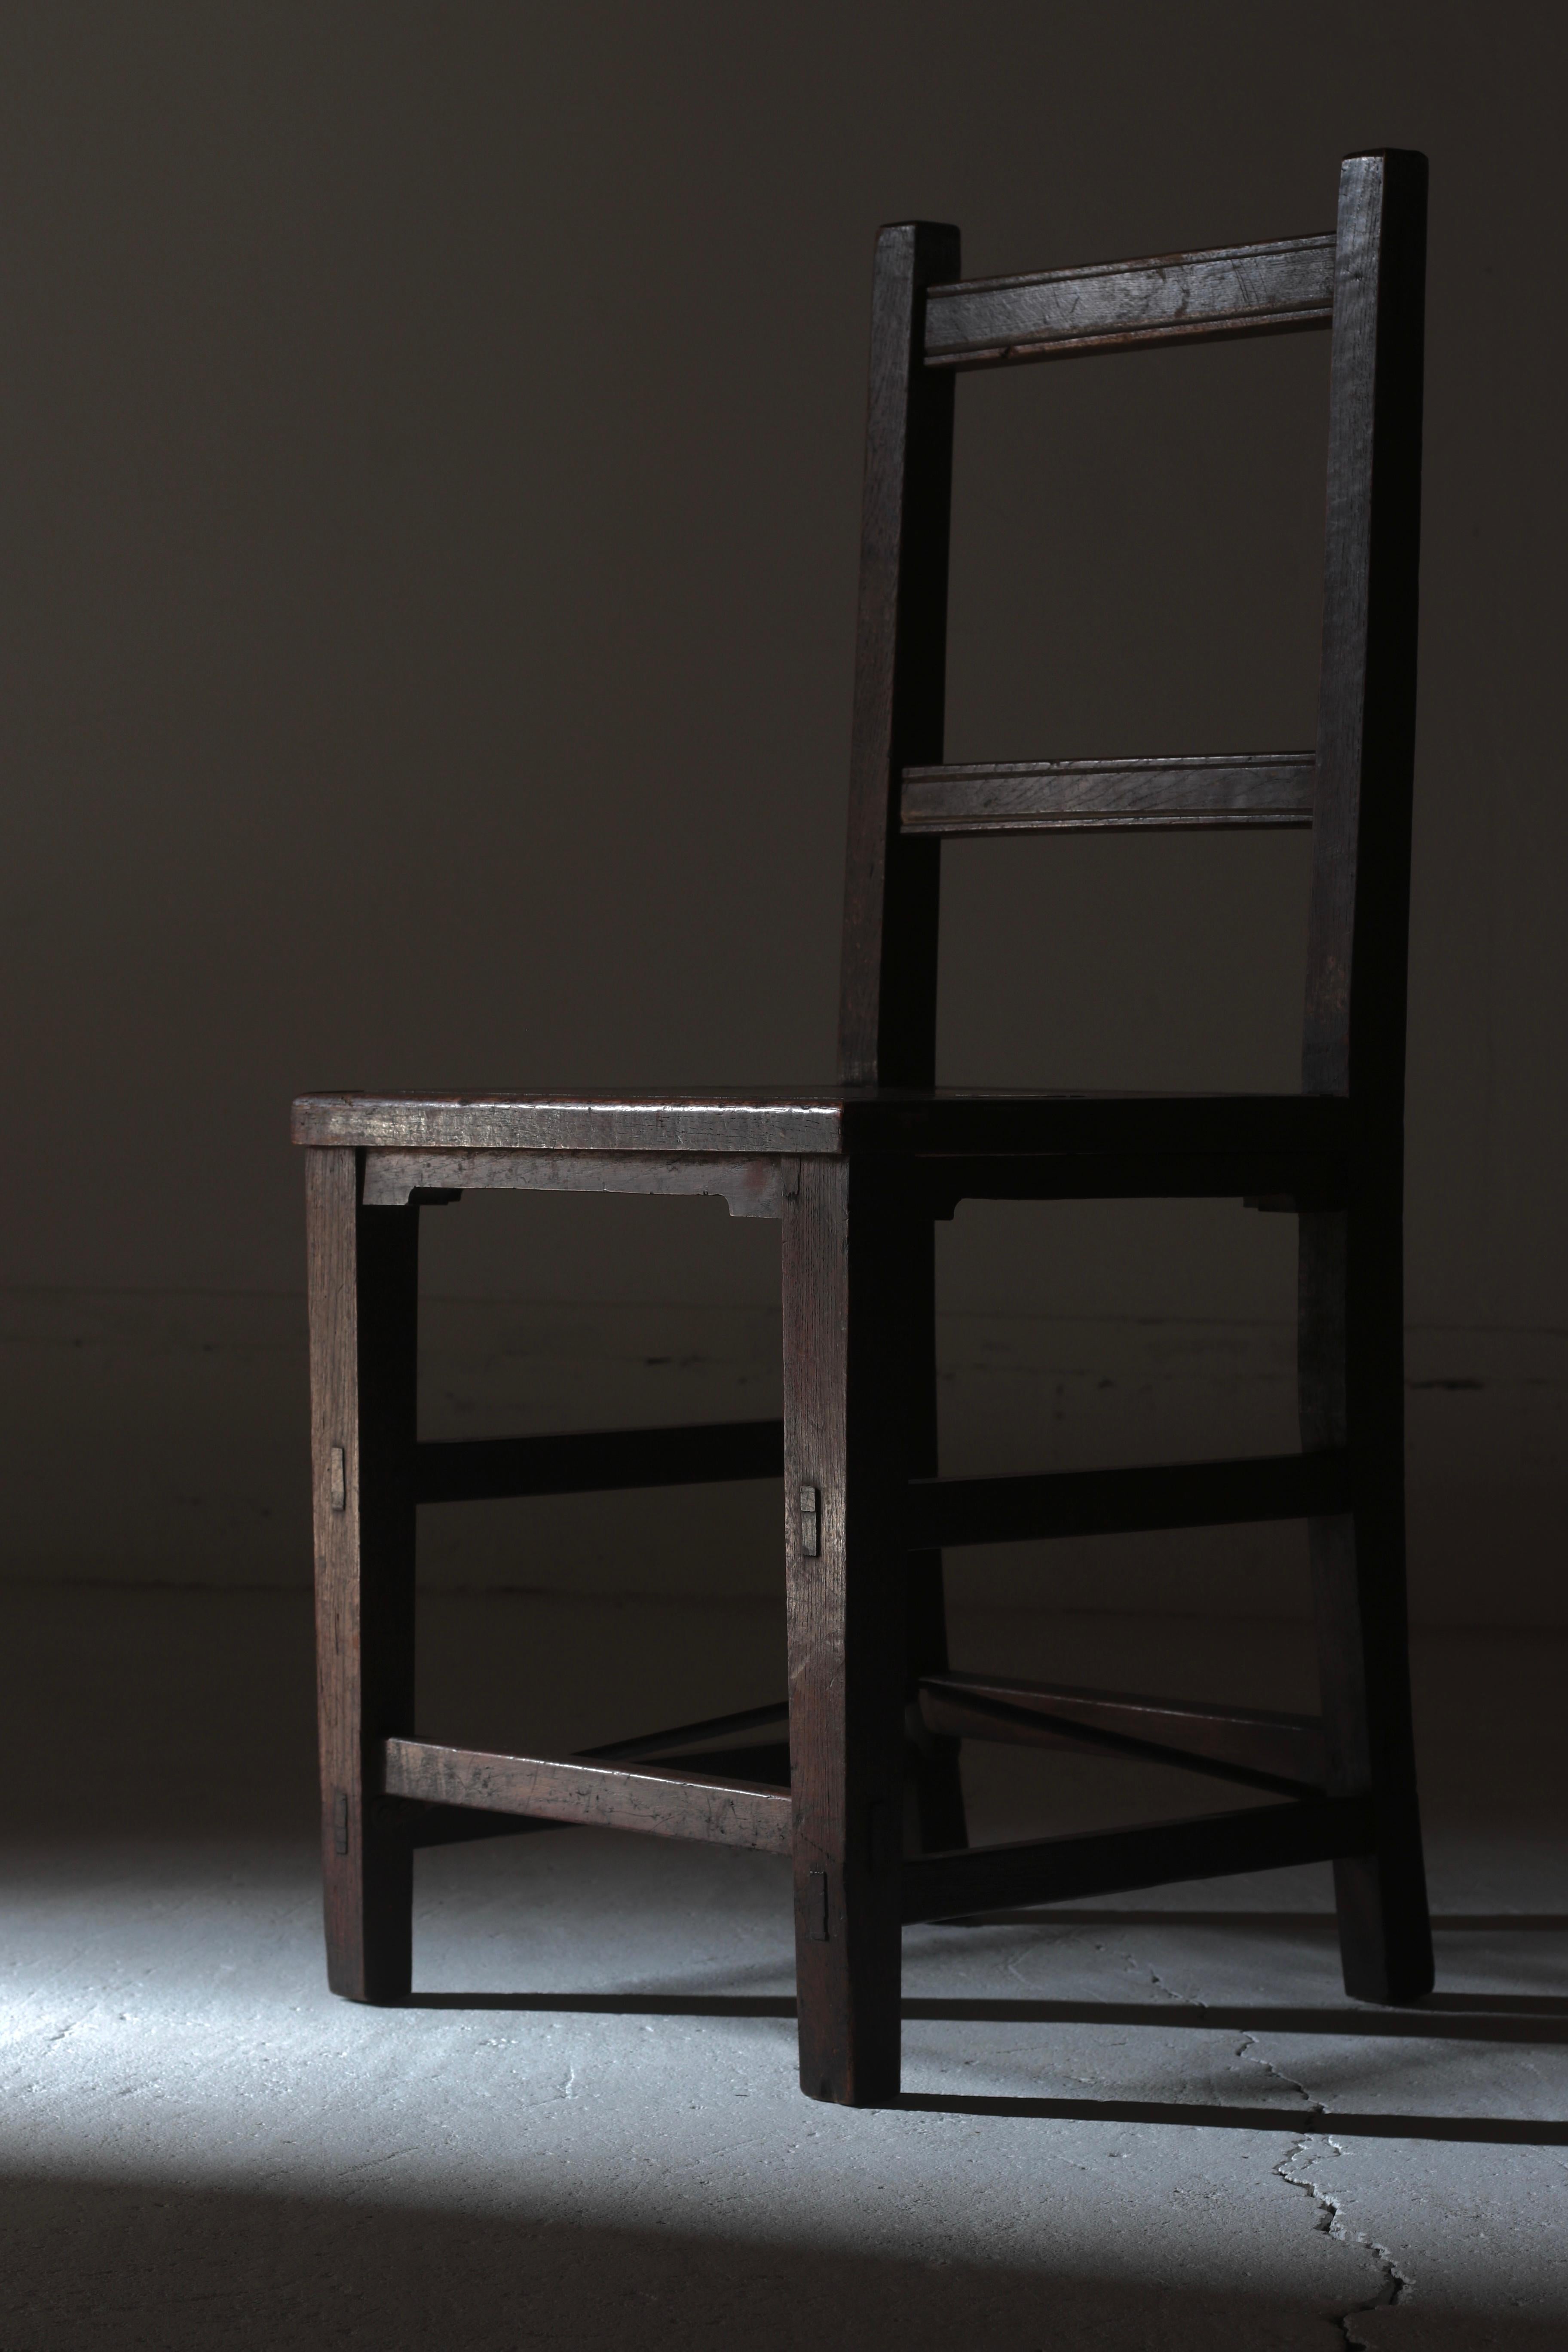 This is an old wooden Japanese chair.

Zelkova is used for both frames and sheets.

The square form has a very simple impression.

An iron rod is used to support the legs, which is a rare construction.

It seems to be from the Taisho period.

It is